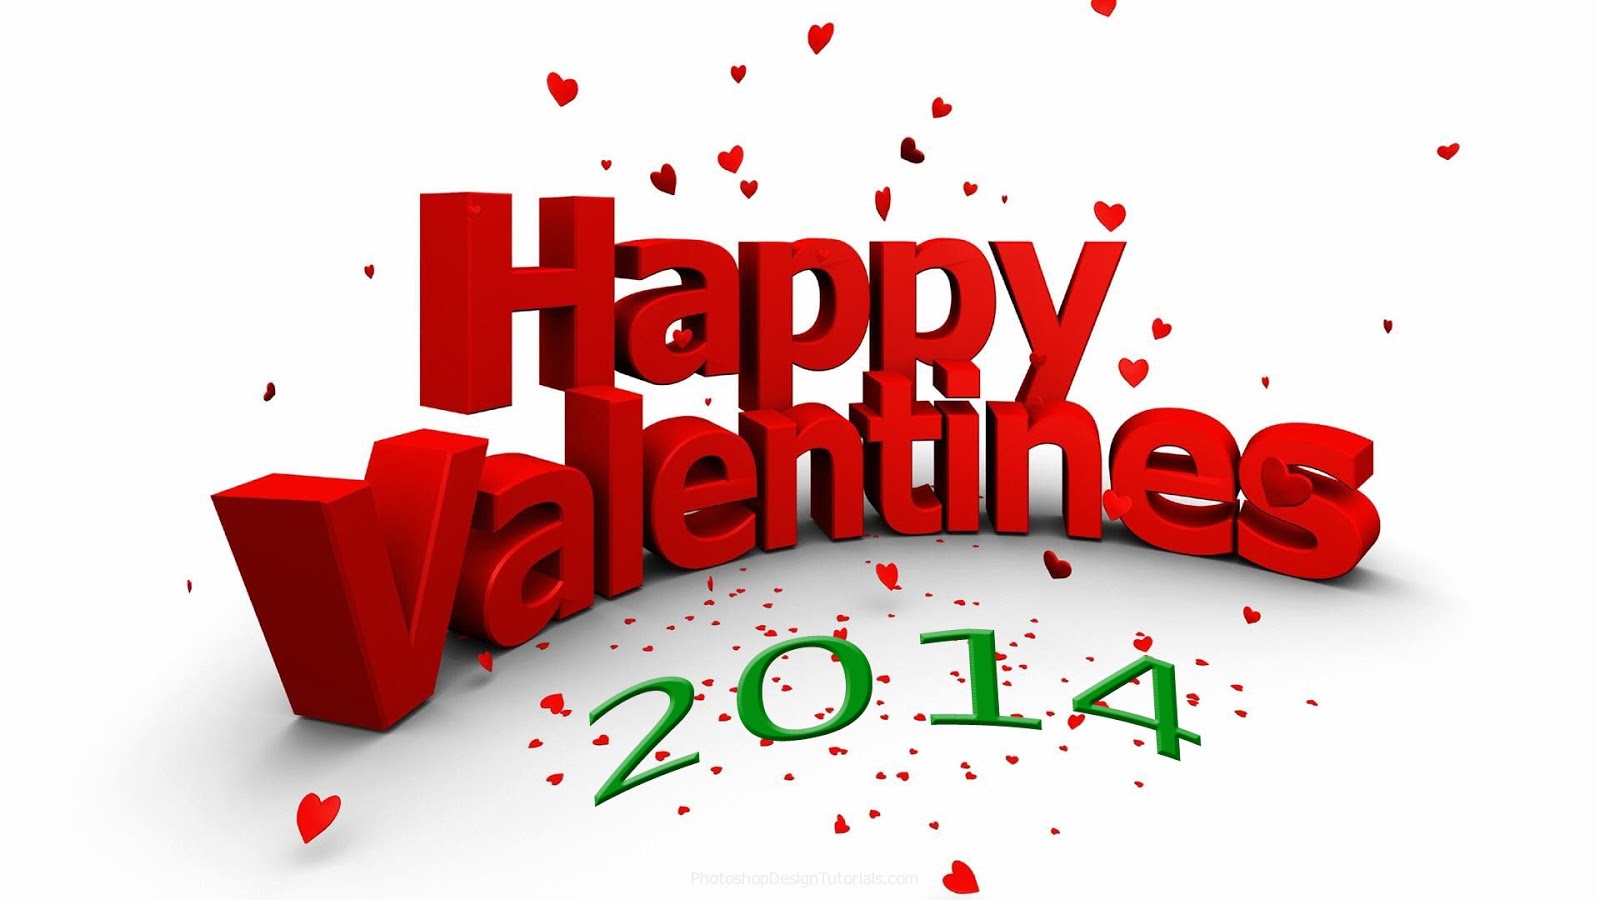 Happy Valentine's day wallpapers 2014